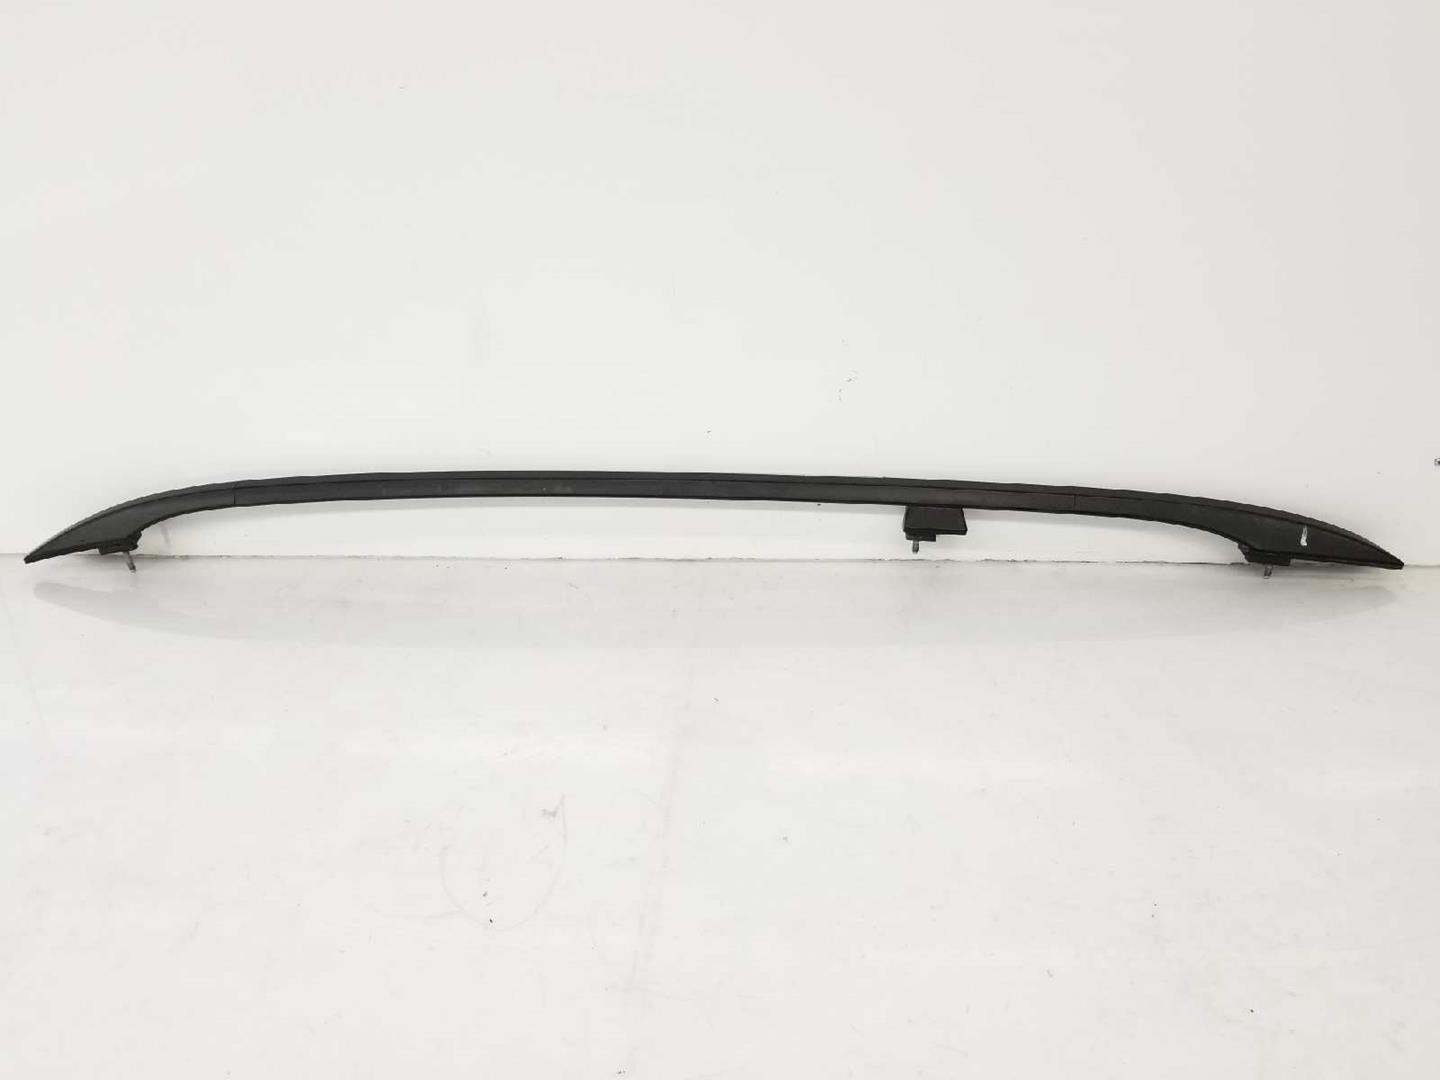 BMW X3 E83 (2003-2010) Right Side Roof Rail 51137052537, 51137052537 19724205